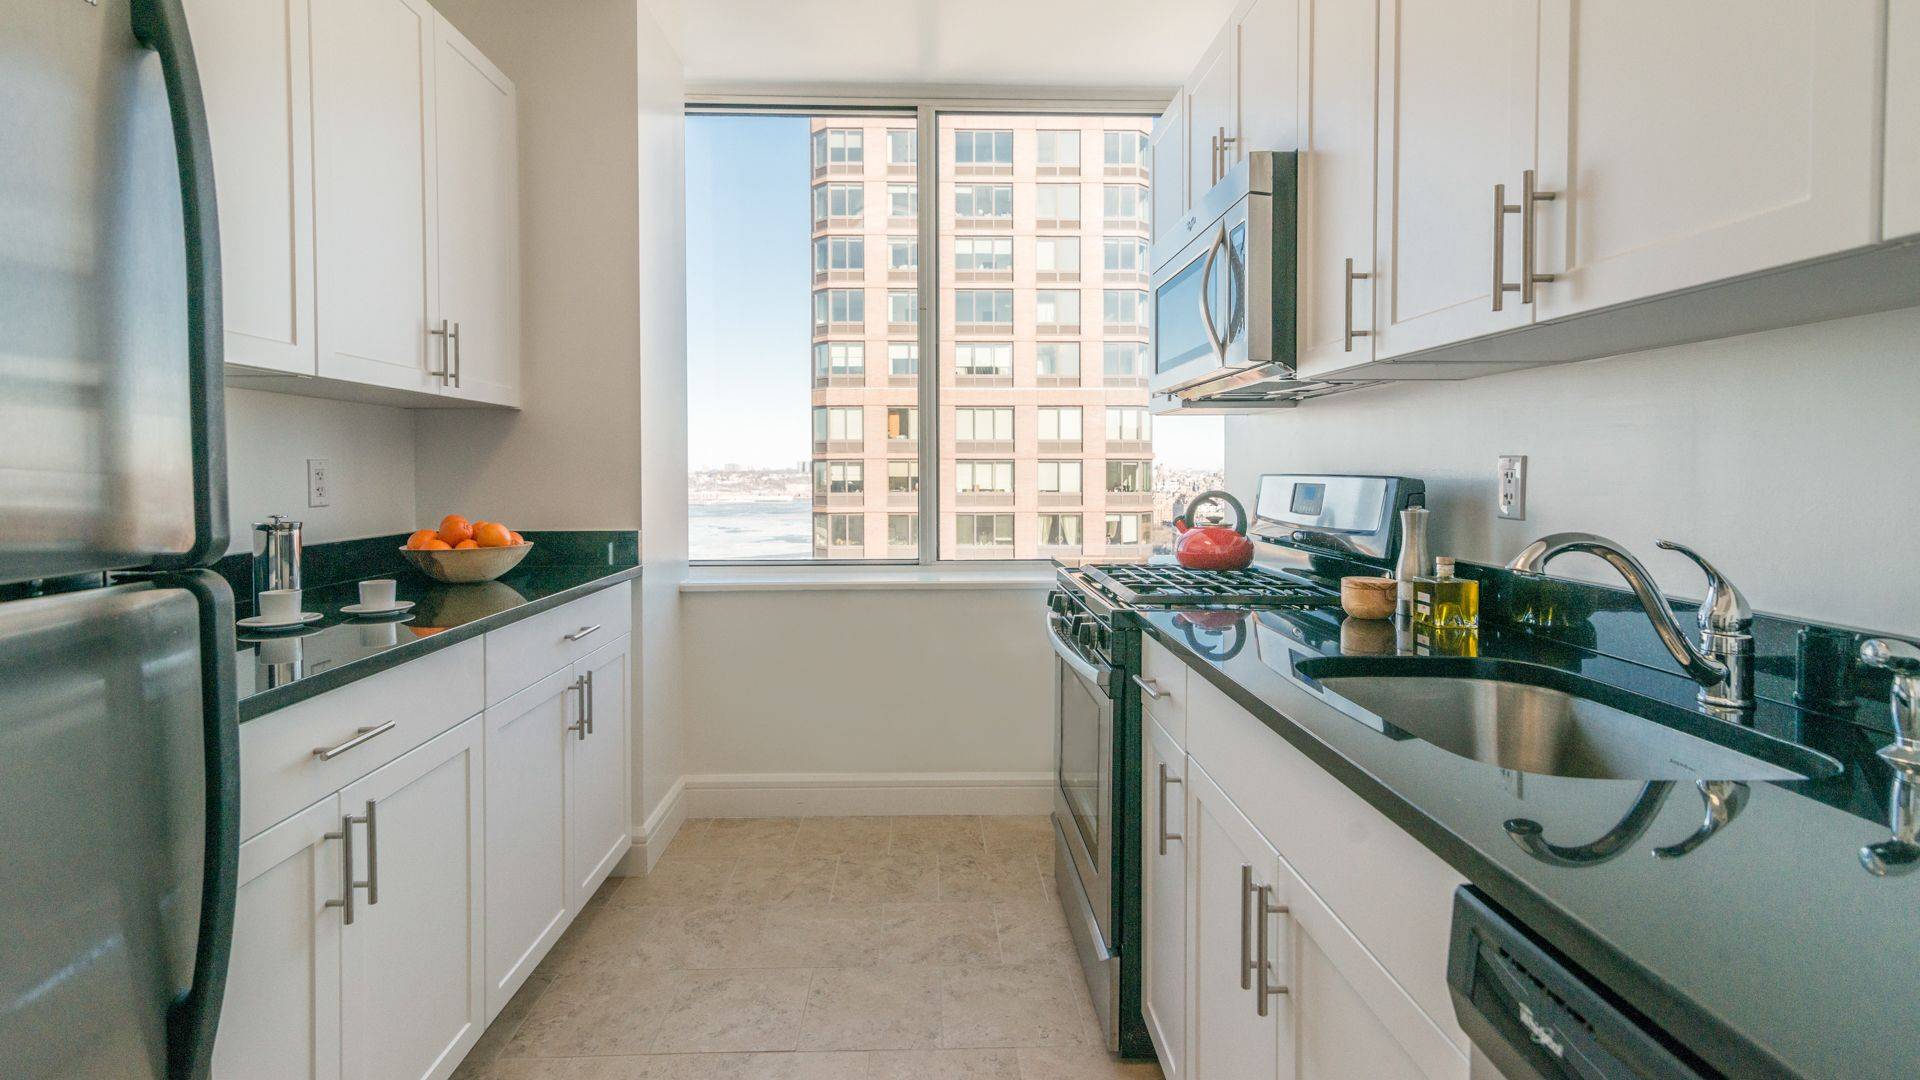 Incredible 2 bedroom and 2 bathroom,brand new with high-rise windows and nice view to Upper West Side.